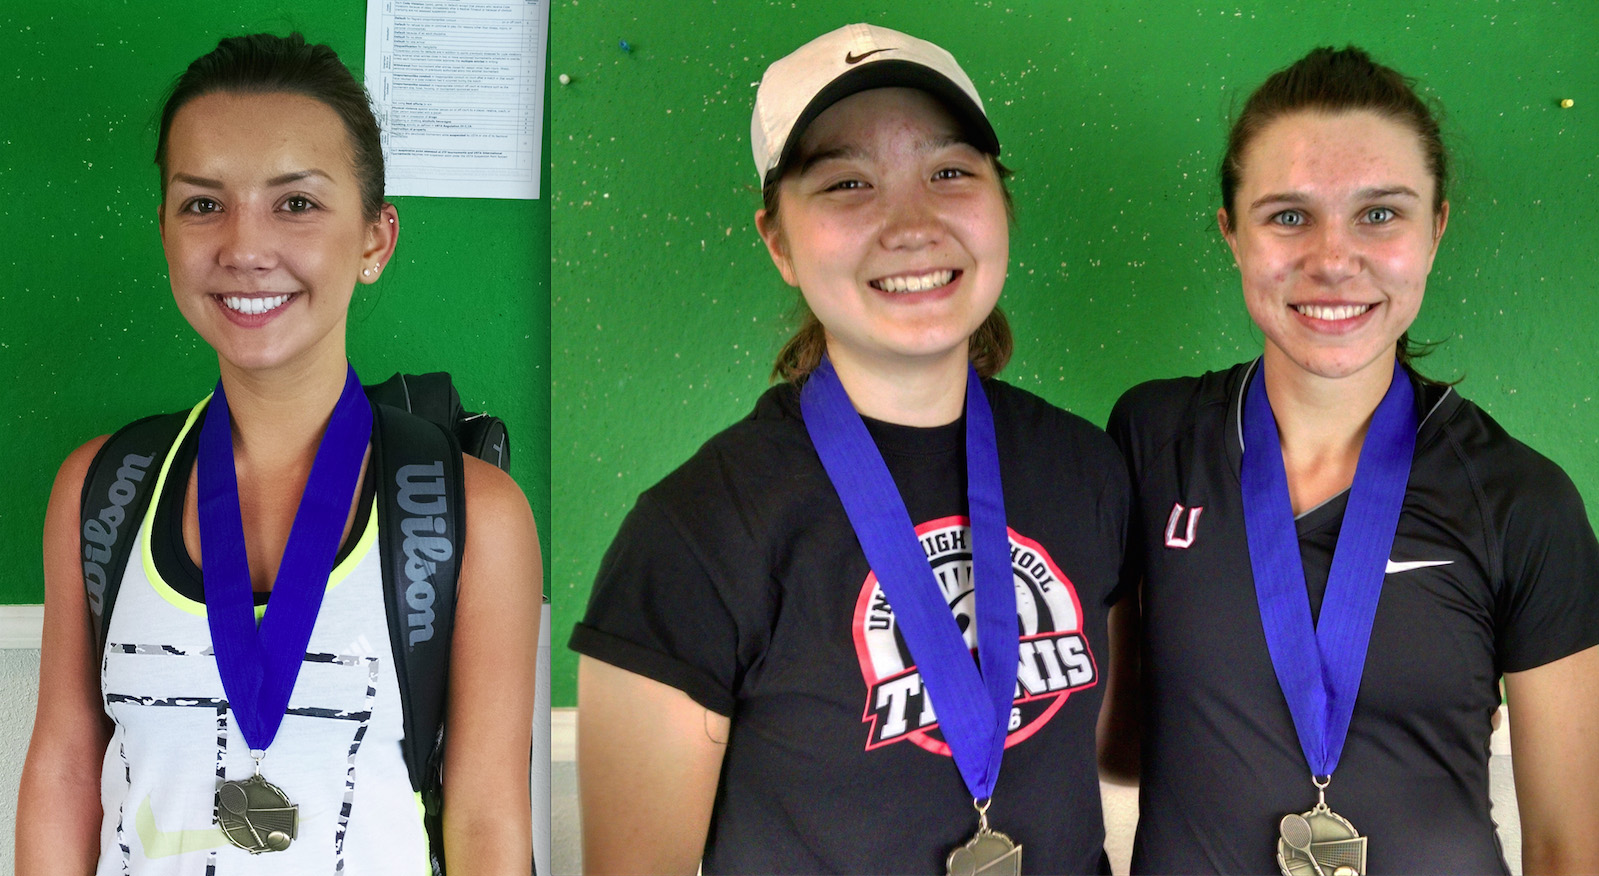 Mountain View's Amila Gogalija, left, and Union doubles team of Sydney Wallace and Mckenzie Schreiner won 4A district tennis titles on Friday, May 20, 2016.